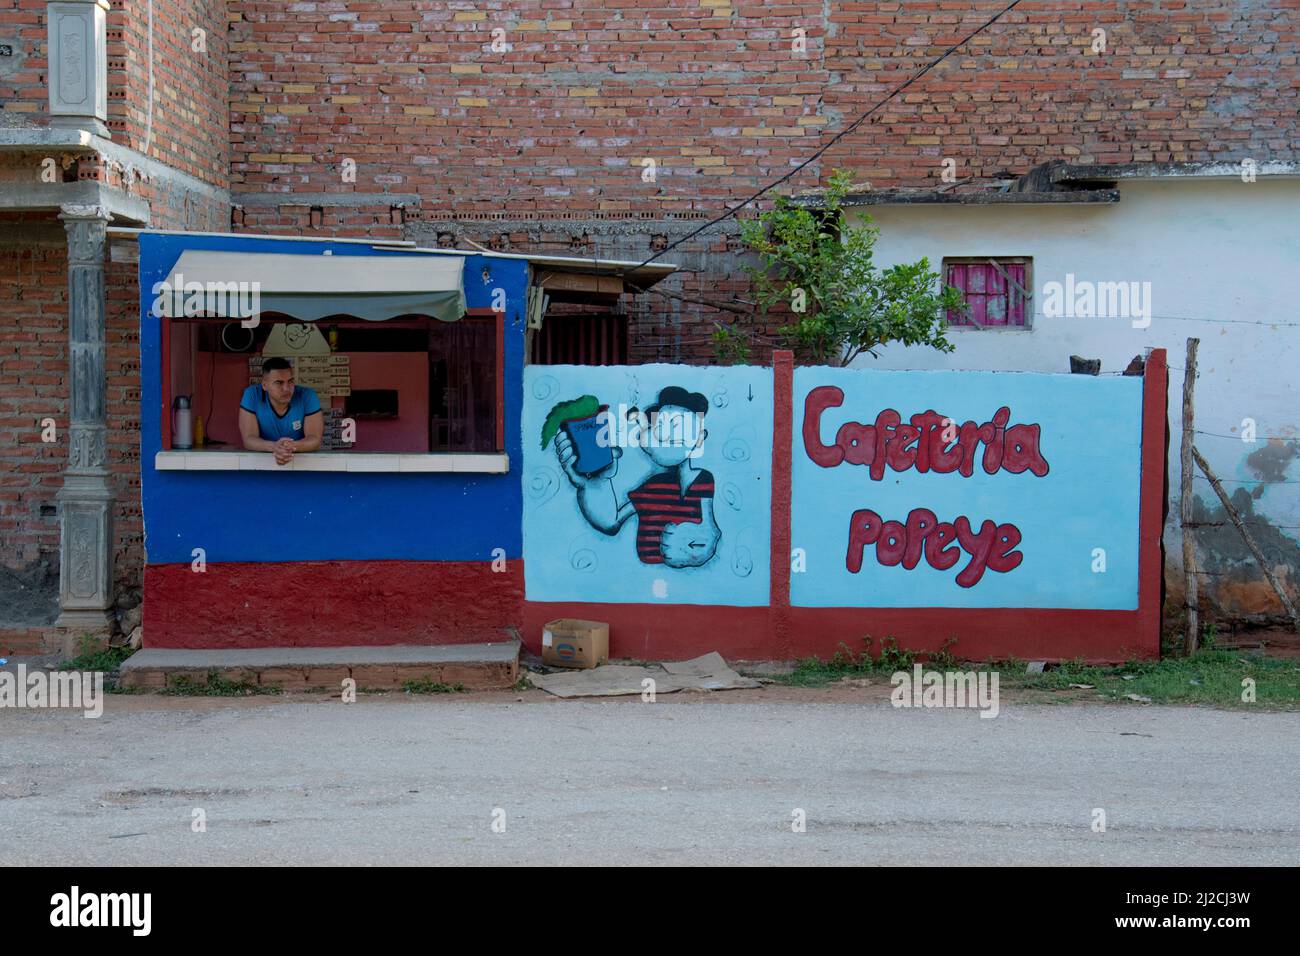 Cuban worked leans on the table of a mural drawing of Popeye the sailor man at a cafe on a street in Trinidad, Cuba. Stock Photo